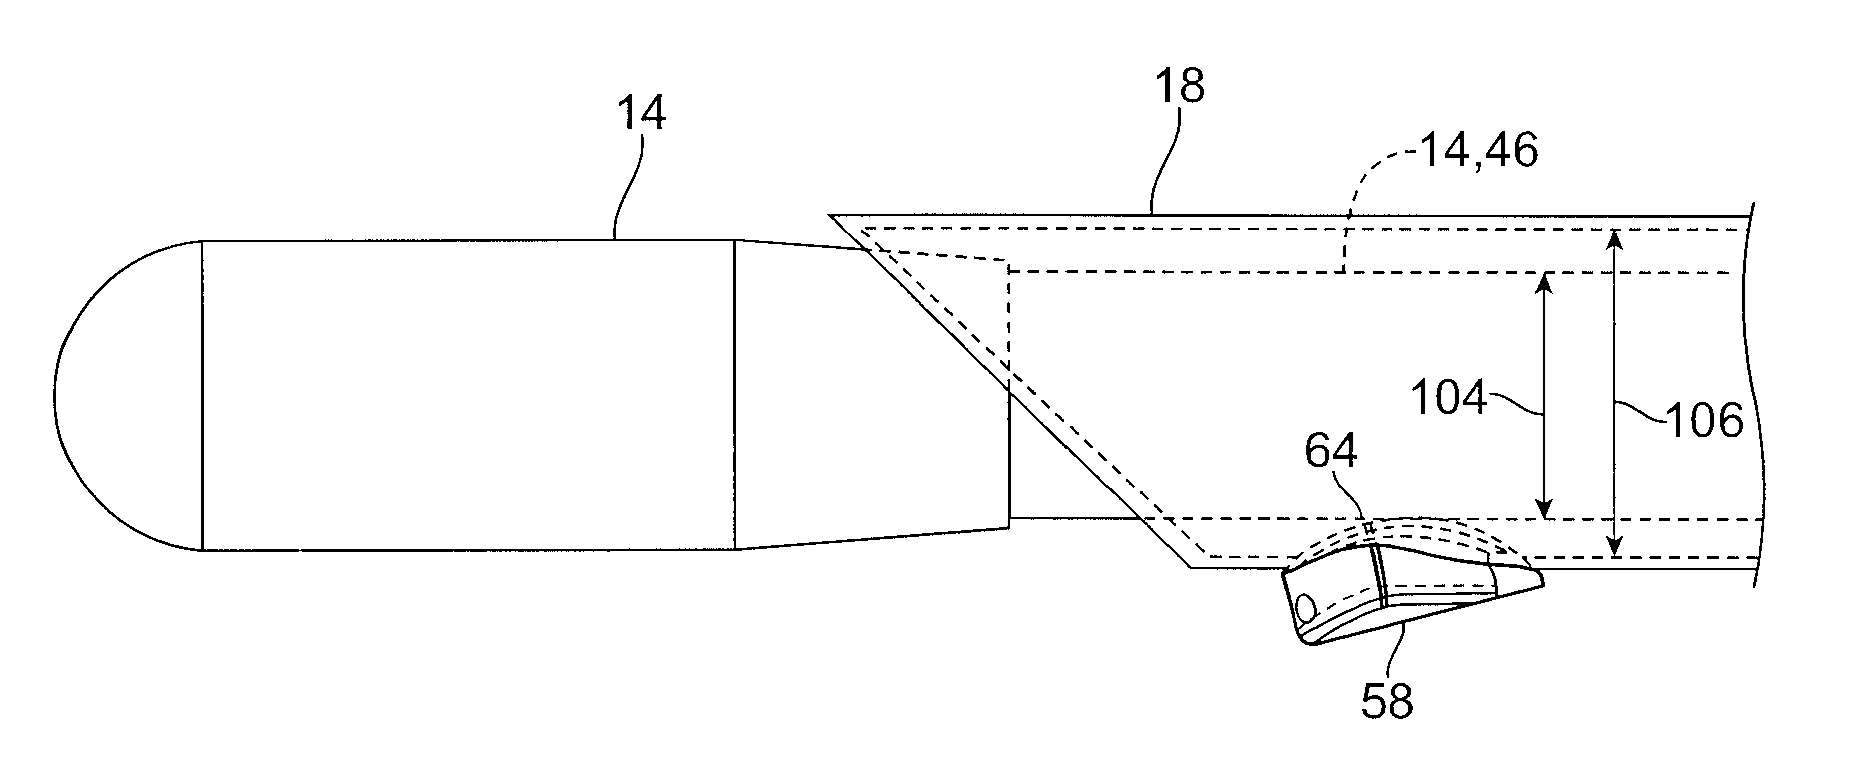 Surgical port with embedded imaging device